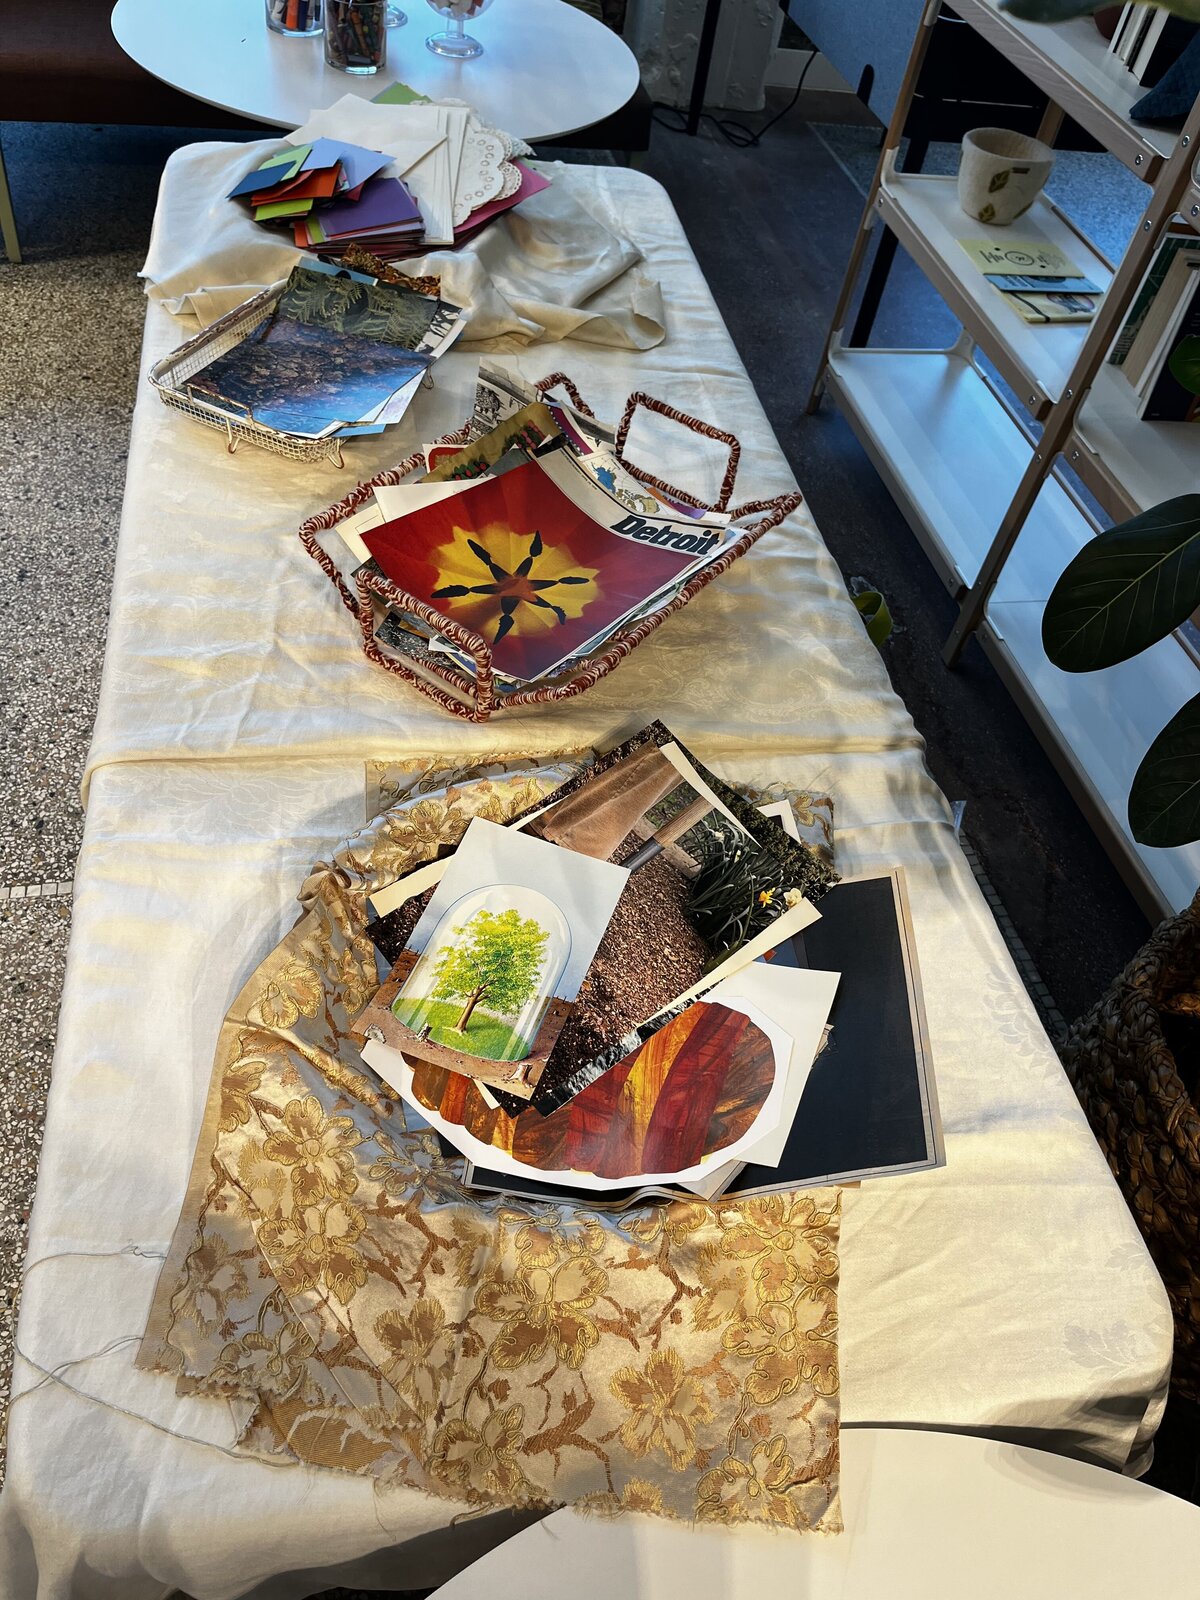 Table set up with different collage materials for participants during a collage workshop